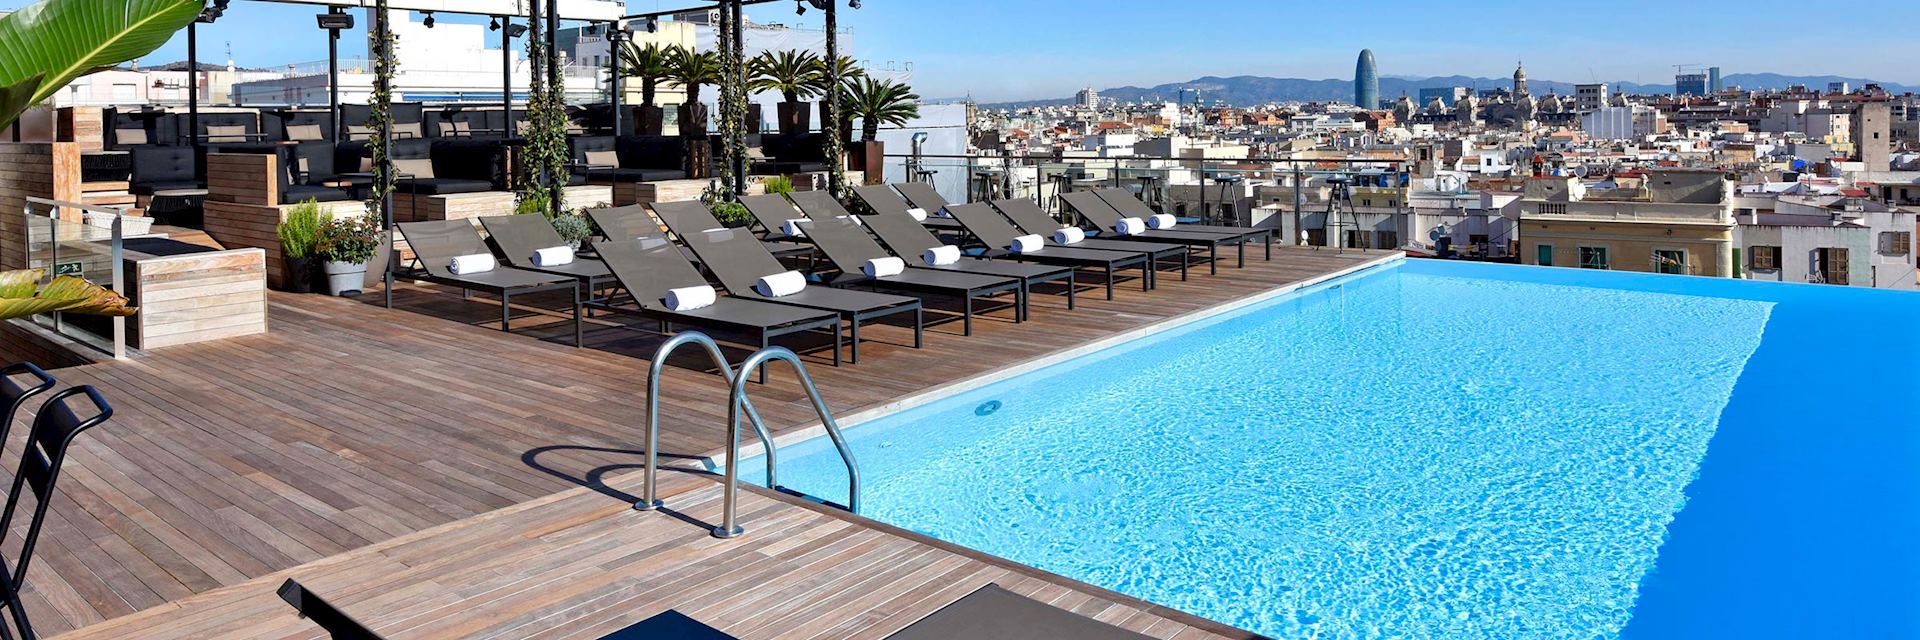 Grand Hotel Central Barcelona Audley Travel